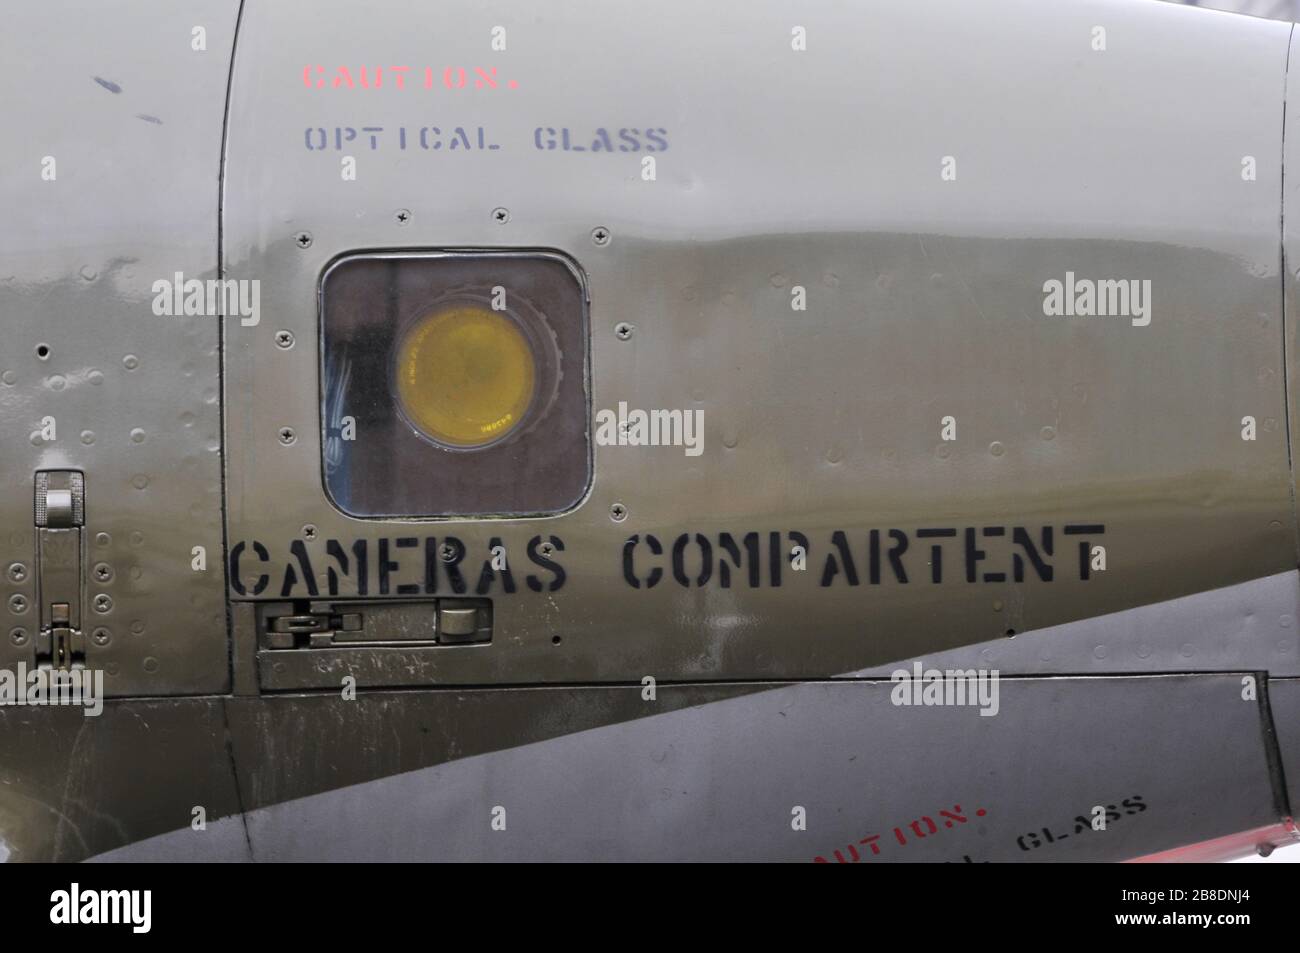 Particular of war airplanes Stock Photo